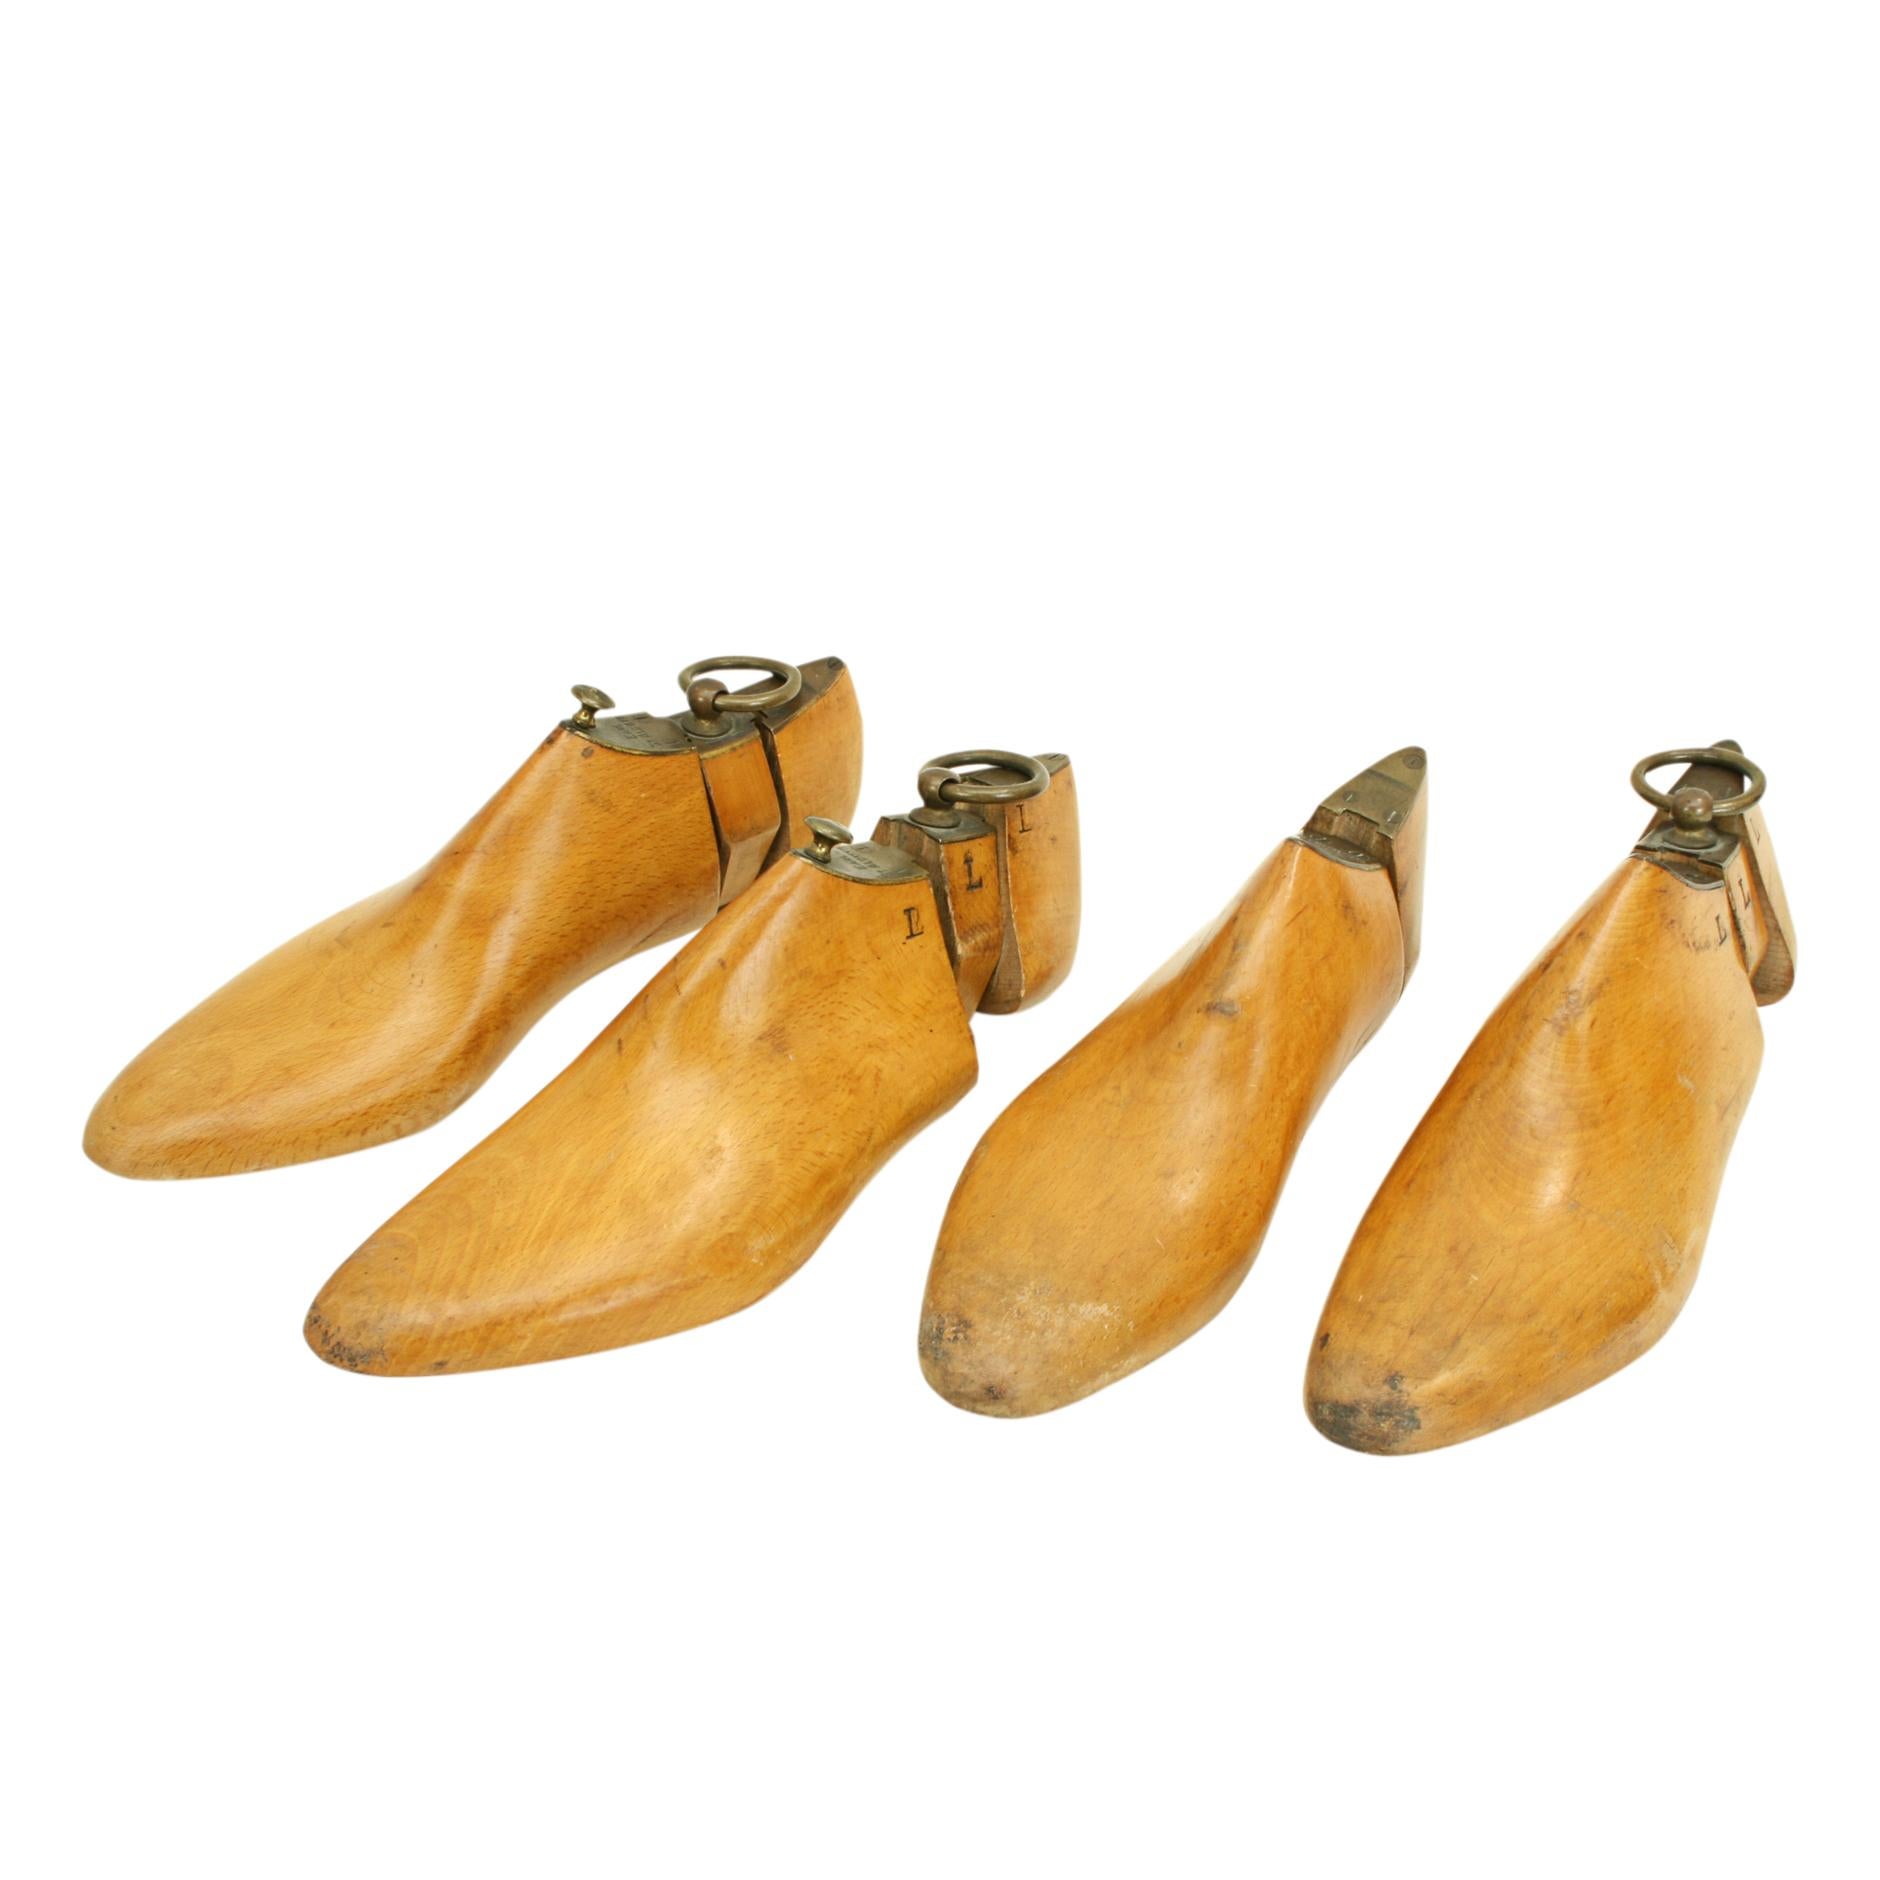 Vintage Wooden Shoe Trees, Earl St. Aldwyn.
Two pairs of beechwood shoe trees with a lovely golden patina. The shoe trees are made in three pieces with brass tops and pull rings. One set does have a missing center. The brass tops are engraved 